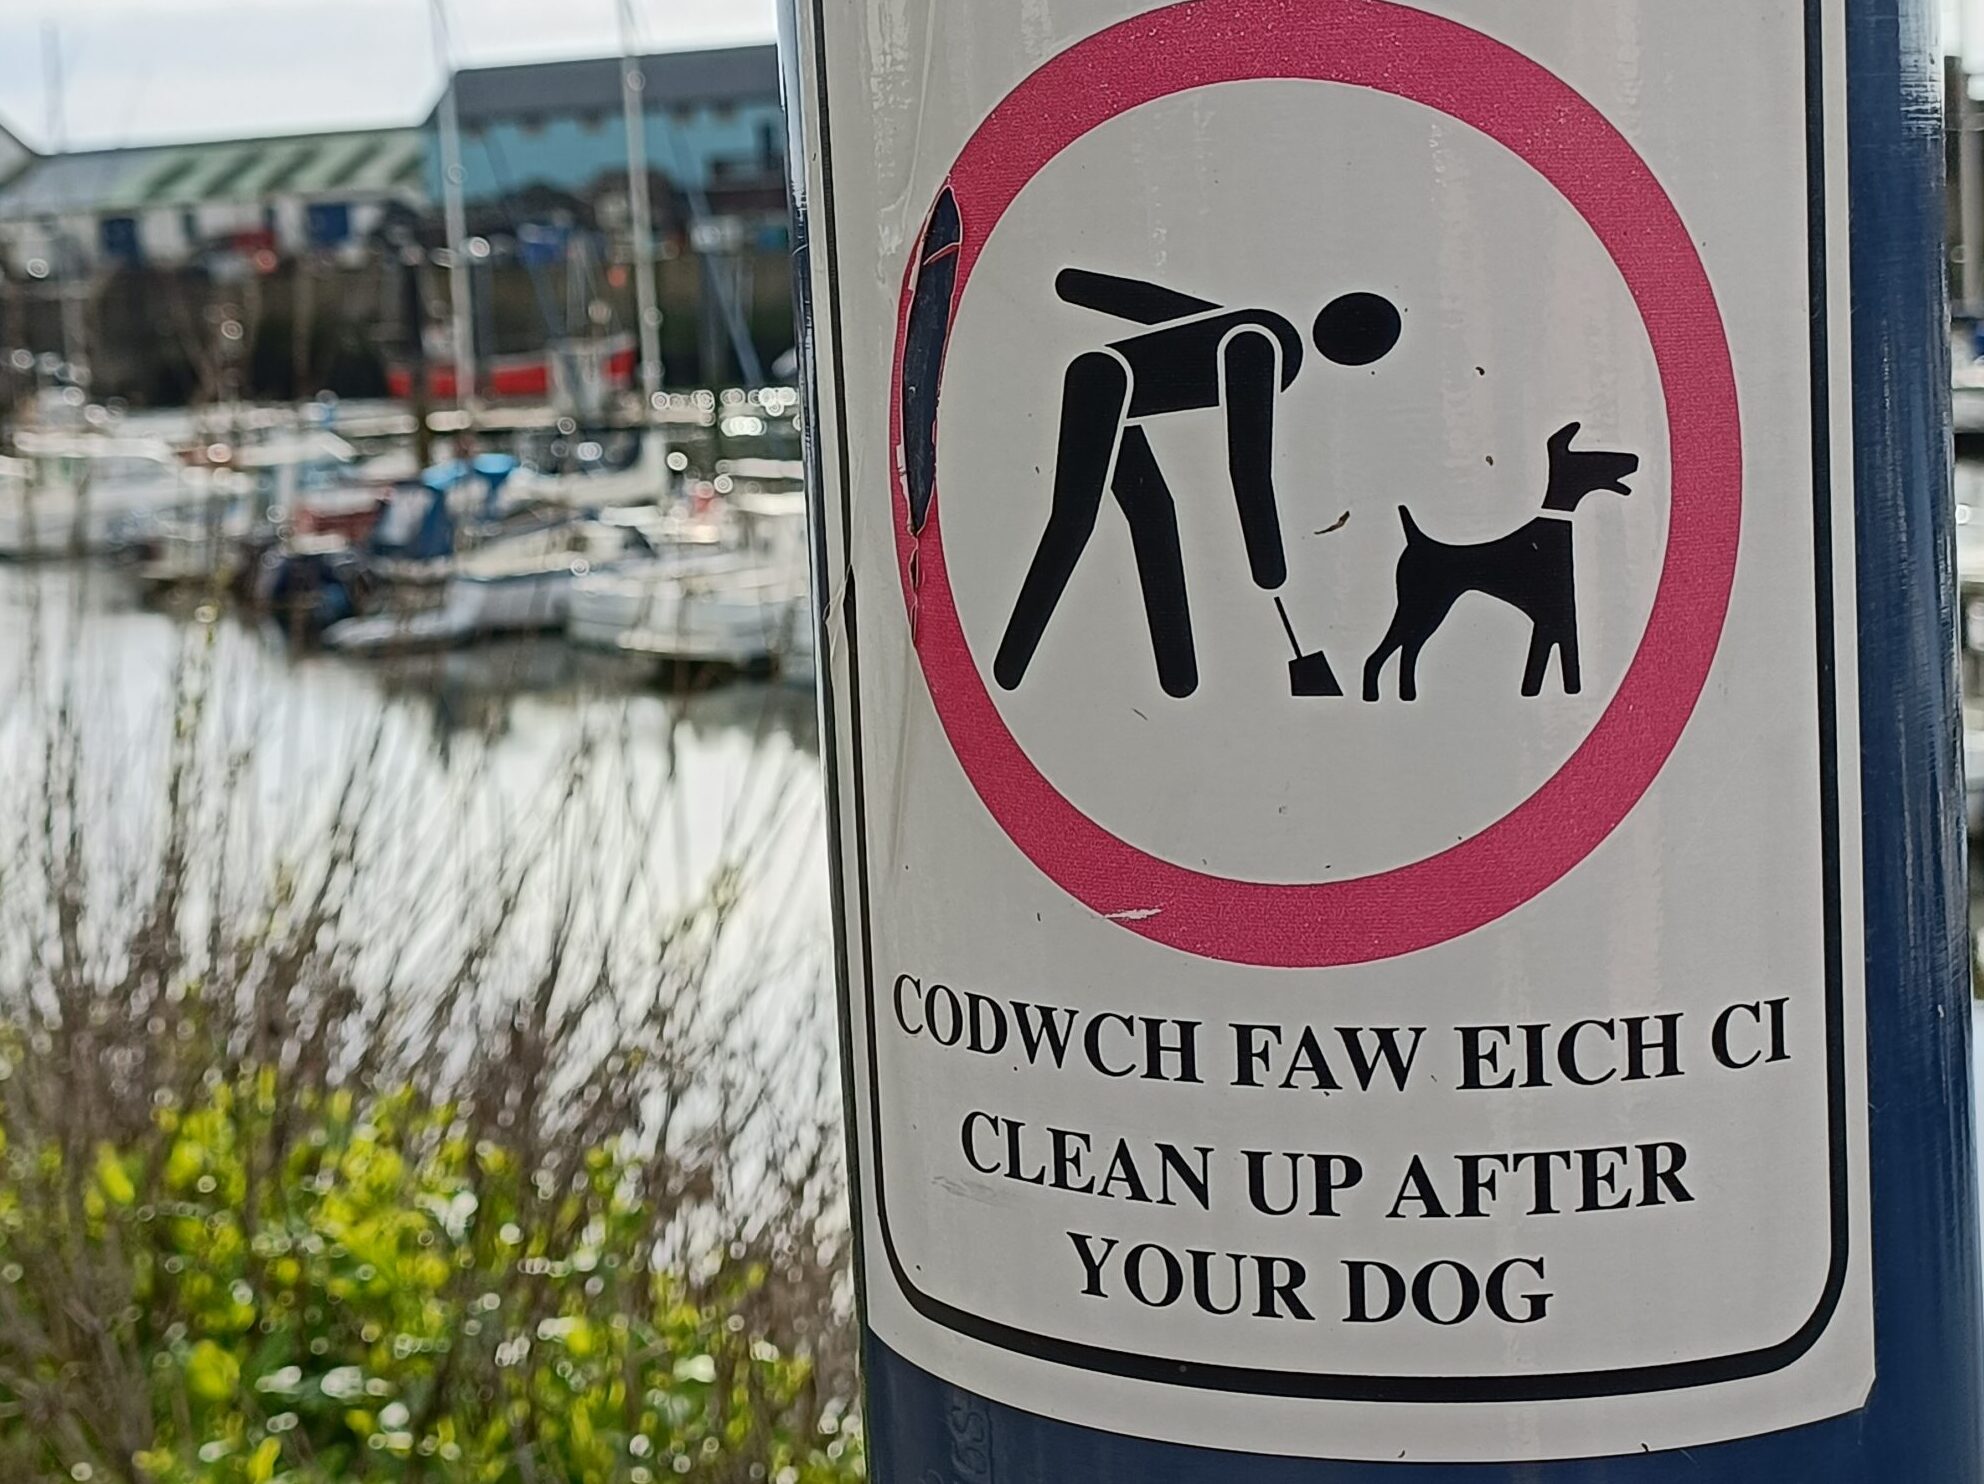 Council workers in Gwent averaged a tonne of dog waste from bins every day during COVID-19 pandemic